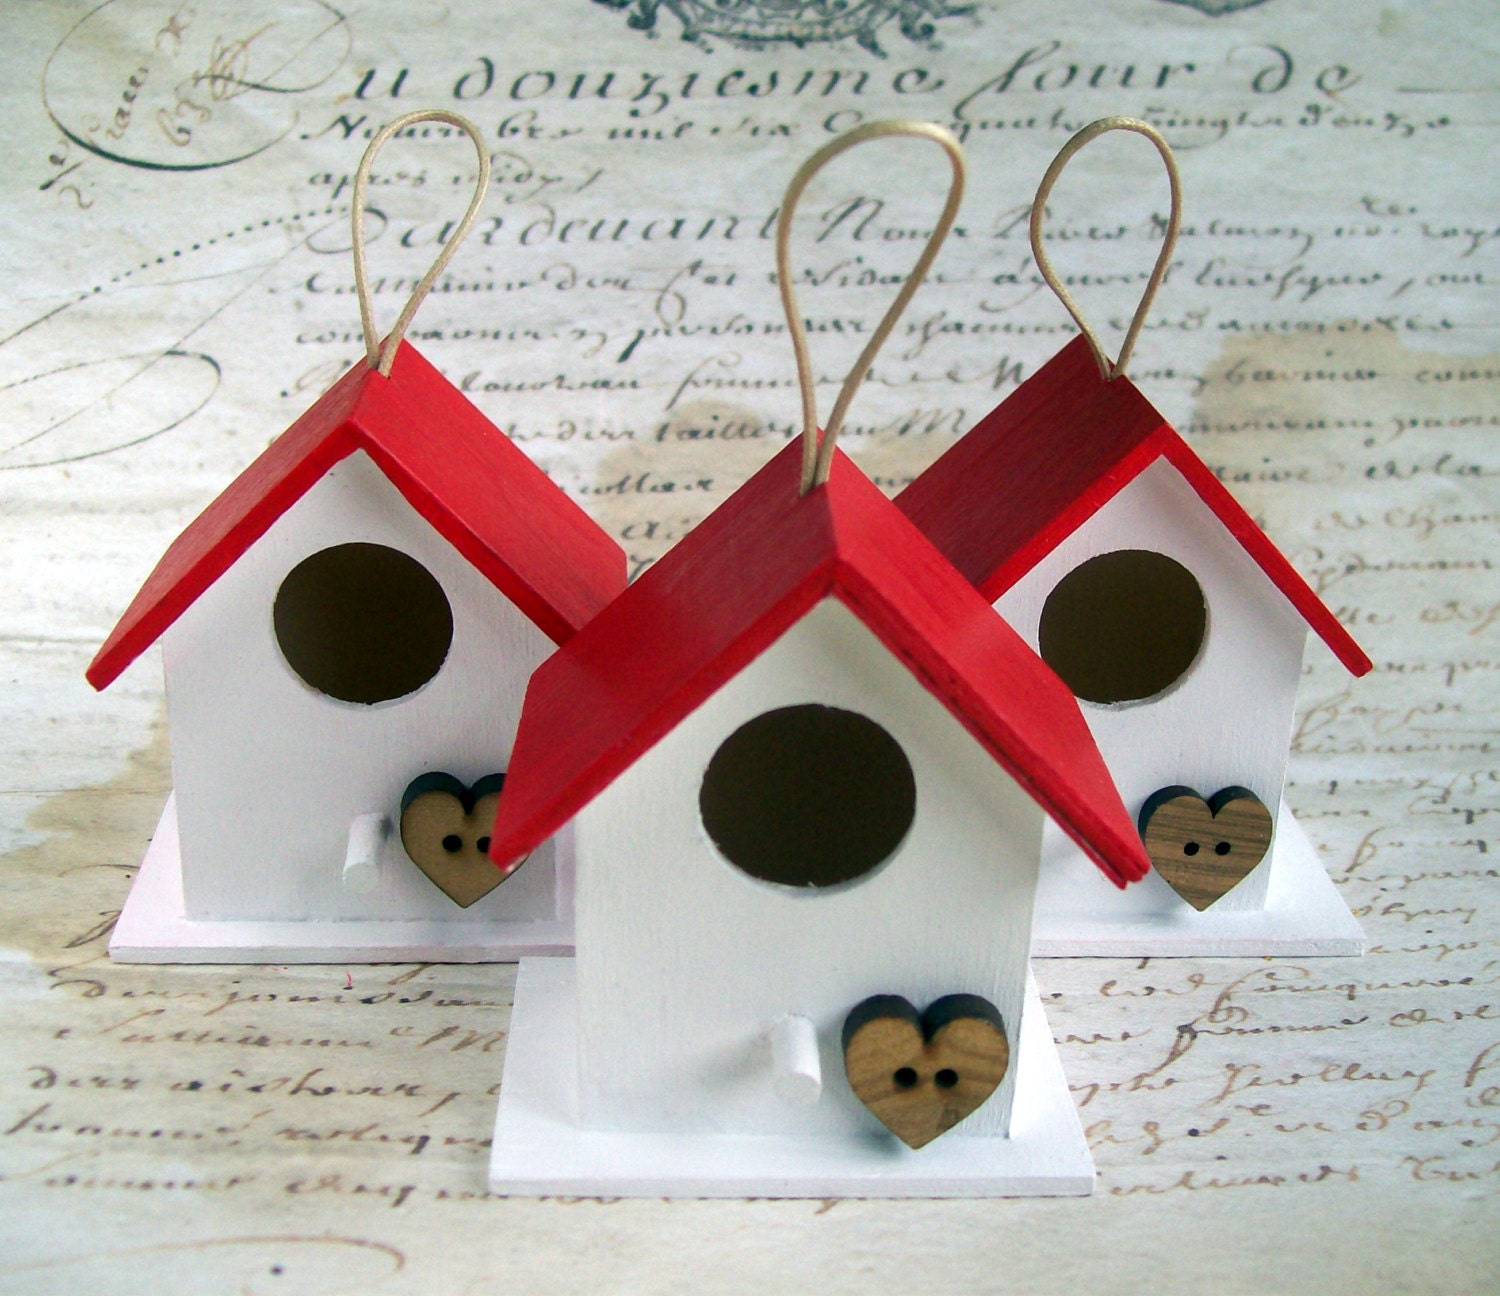 Rustic Christmas birdhouse decorations/ornaments wood red / white heart button - artangel